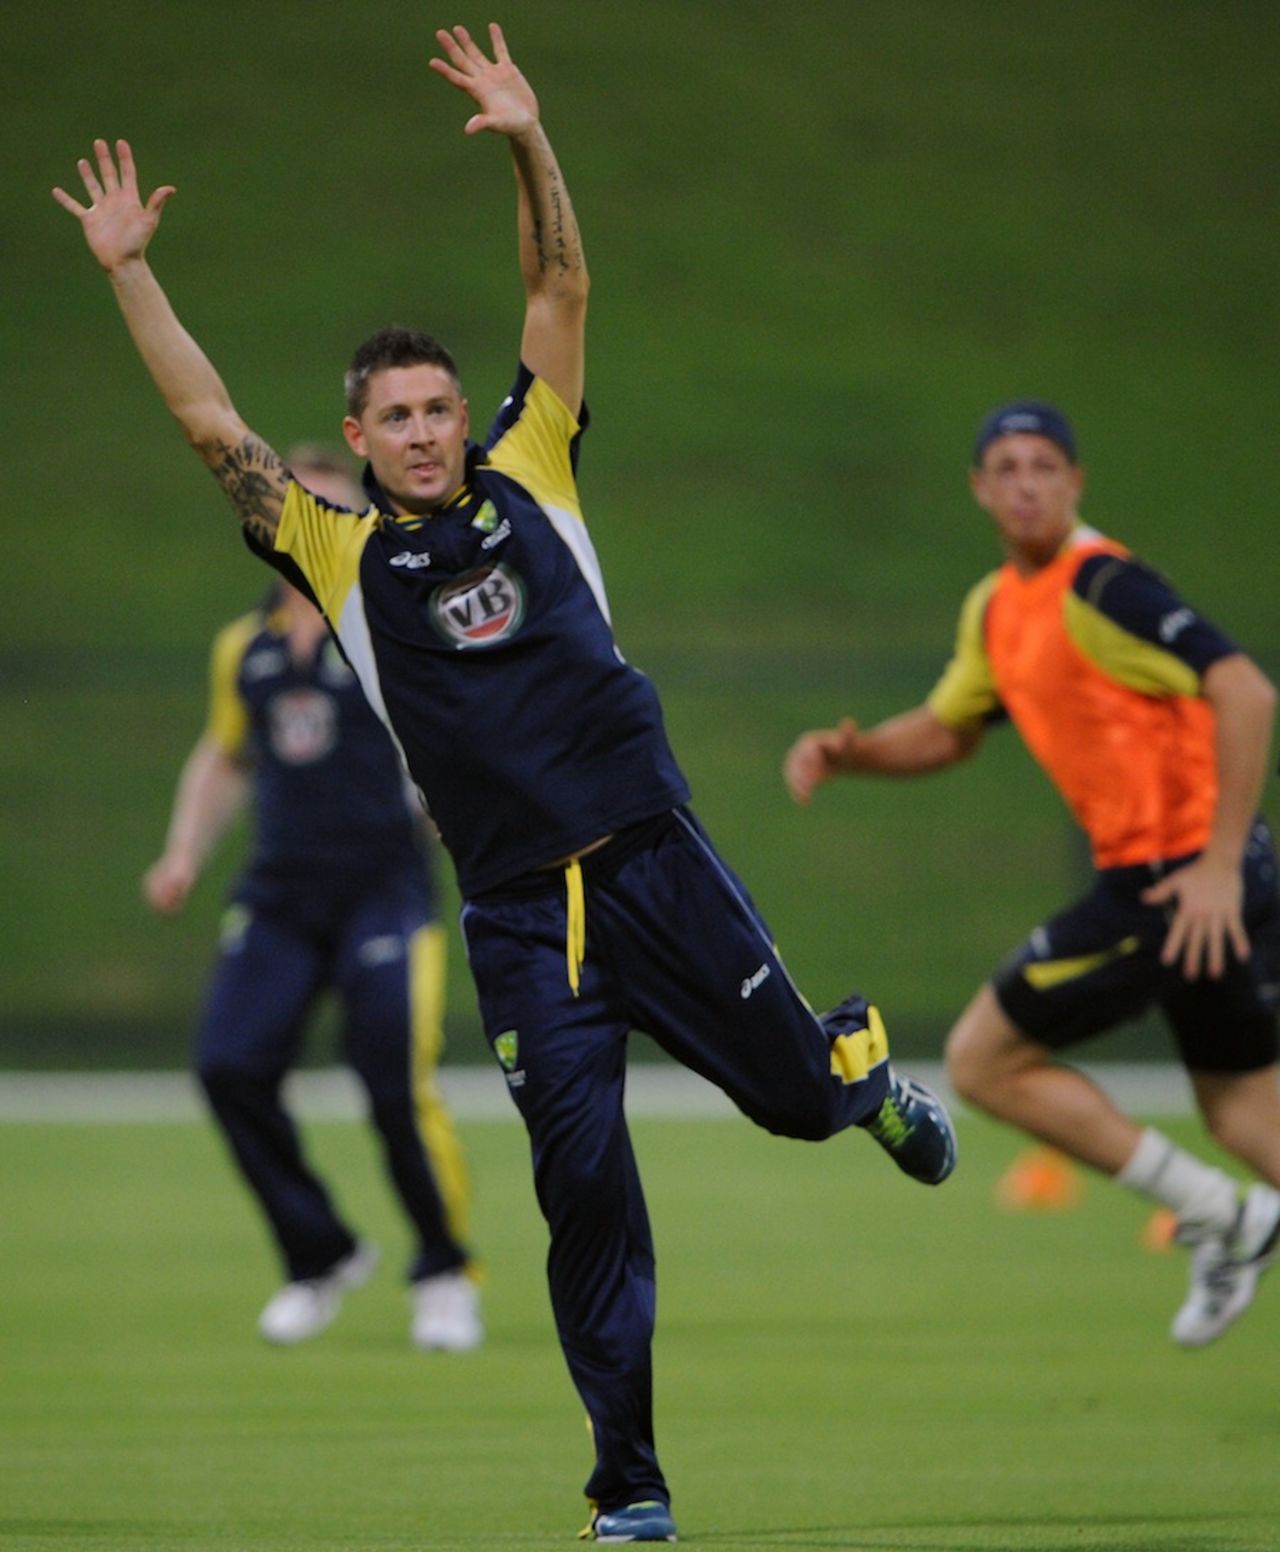 Michael Clarke during a training session, Abu Dhabi, August 30, 2012